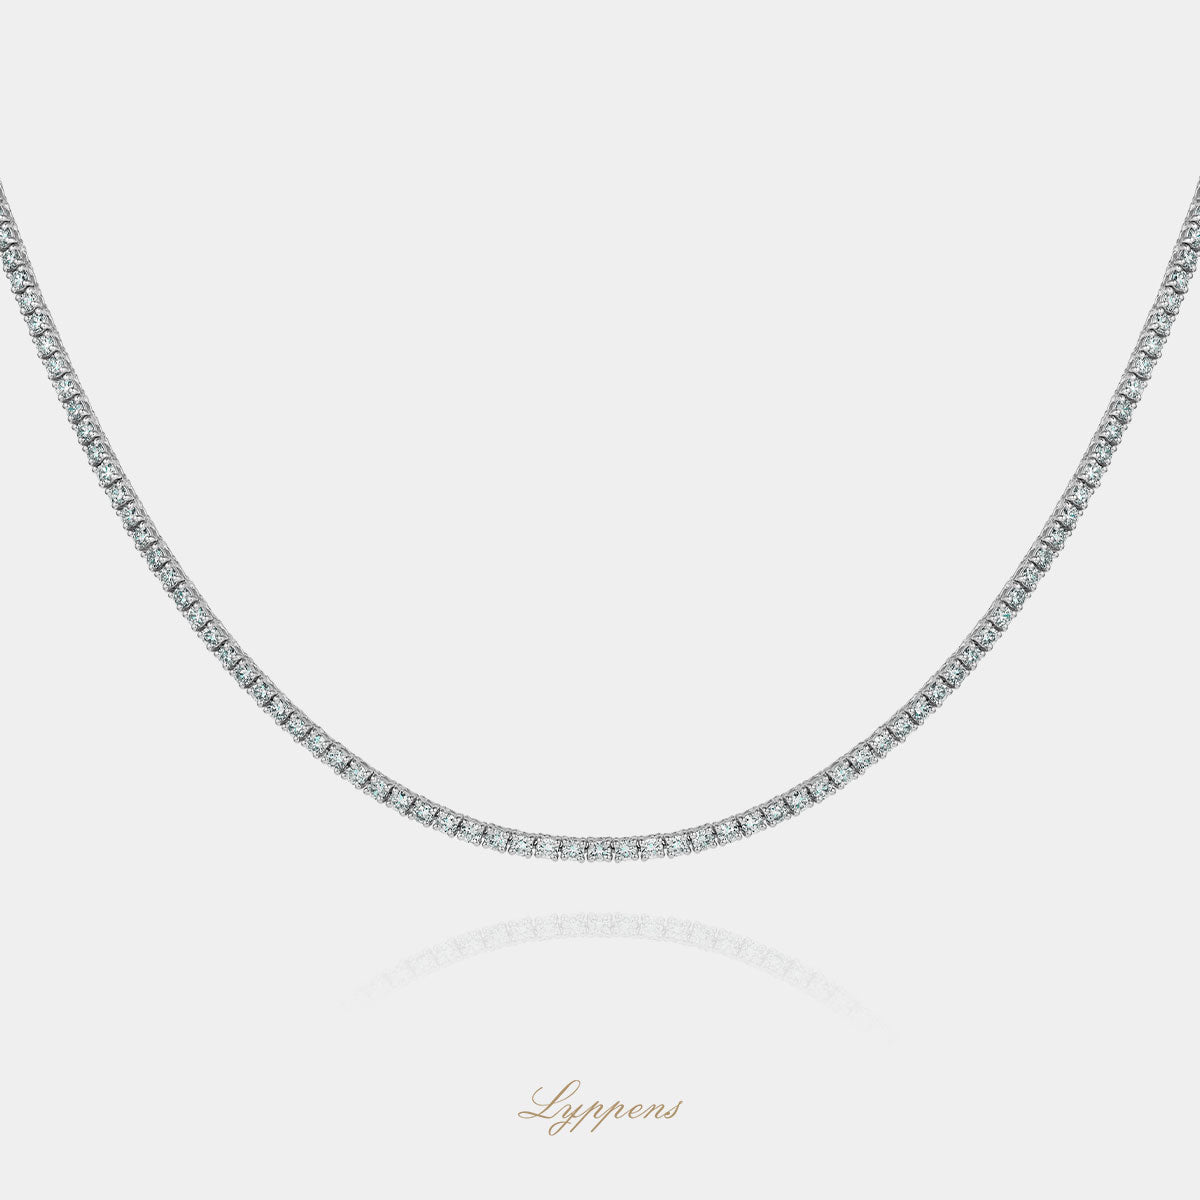 White gold tennis necklace with diamond 5.00ct